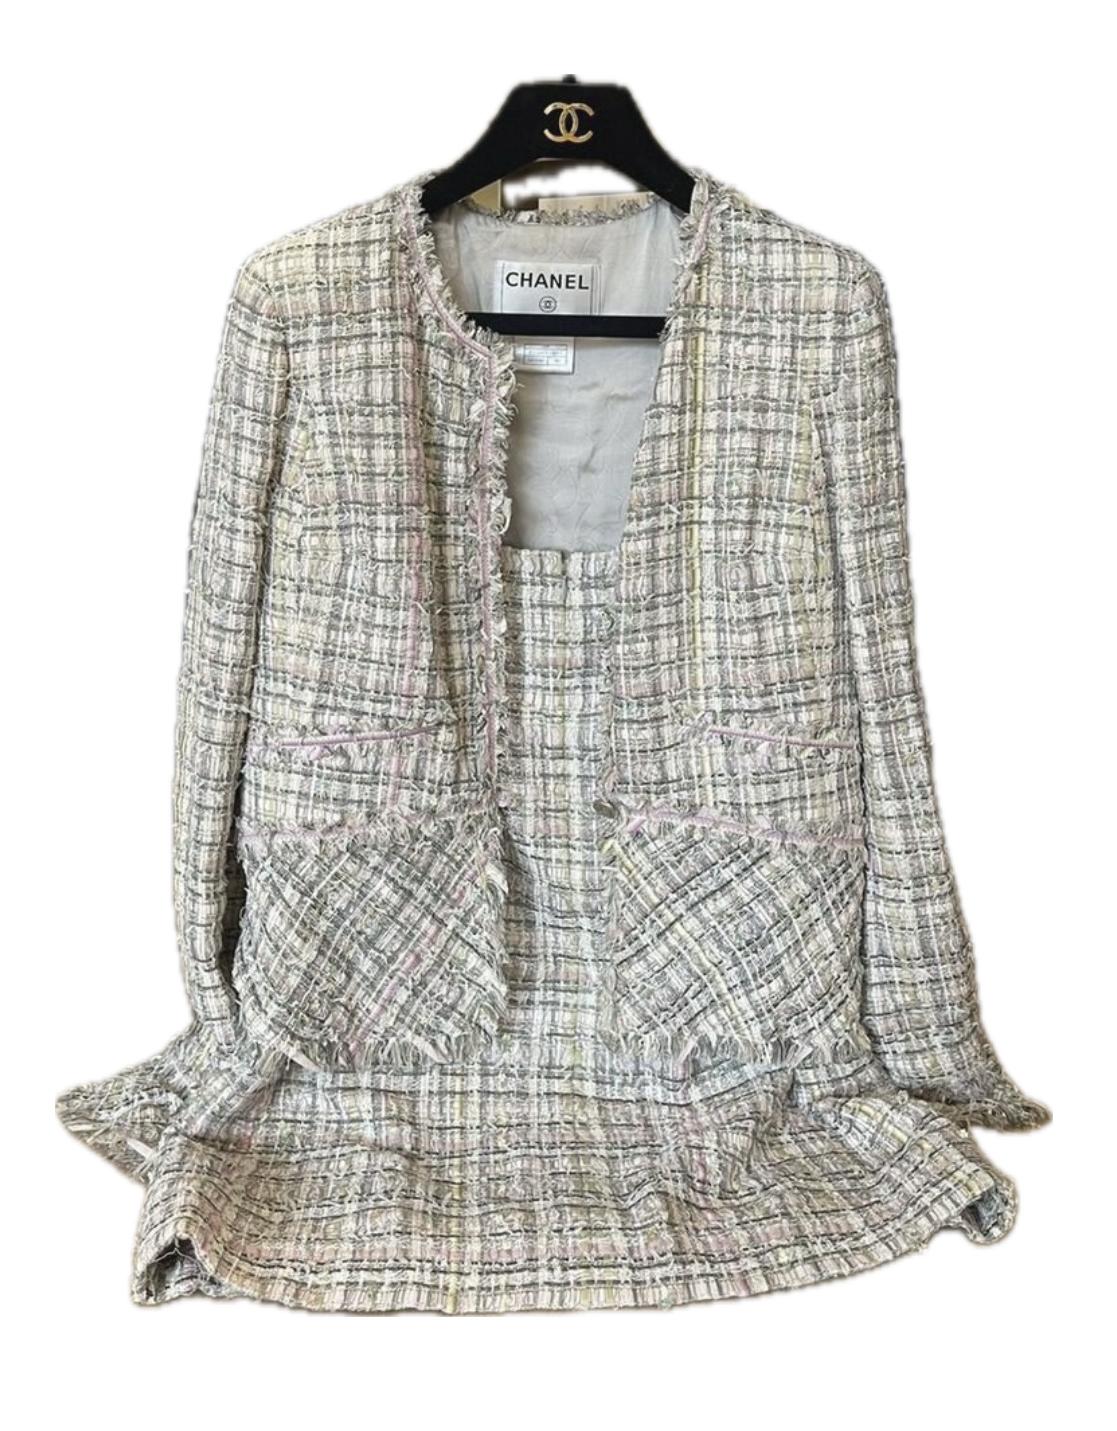 Collectors Chanel lesage ribbon tweed suit with CC logo 'cap' buttons : as seen on fashion icon Anna Wintour!
Boutique price was over 11,000$
Size mark for the jacket 40 FR, for the skirt 38 FR. Overall would fit 38 FR size. Condition is pristine.